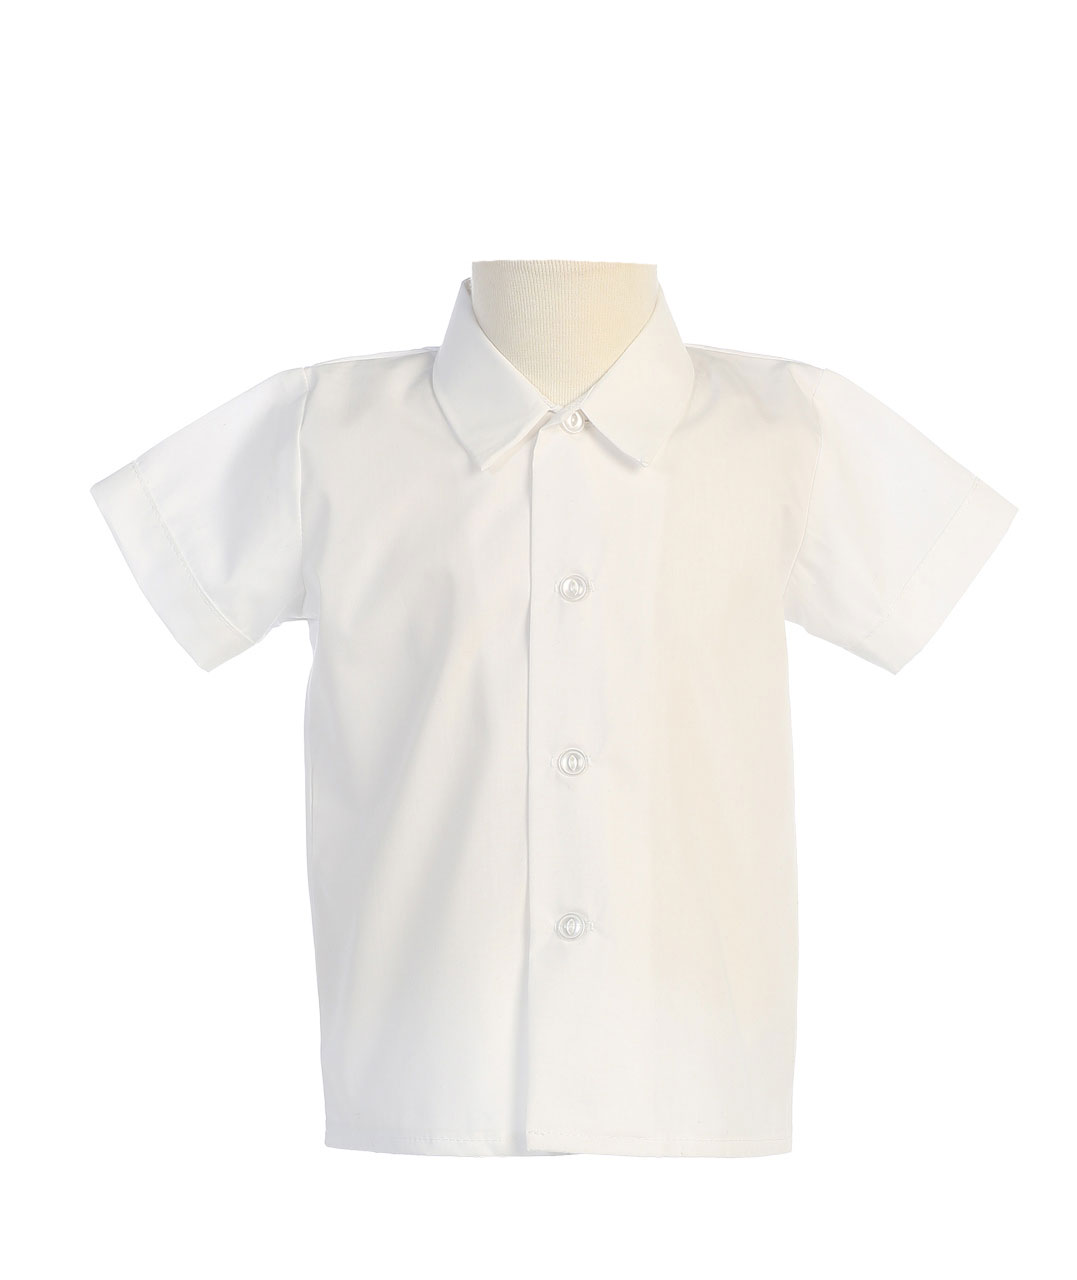 Boys Short Sleeved Simple Dress Shirt - Available in White or Ivory